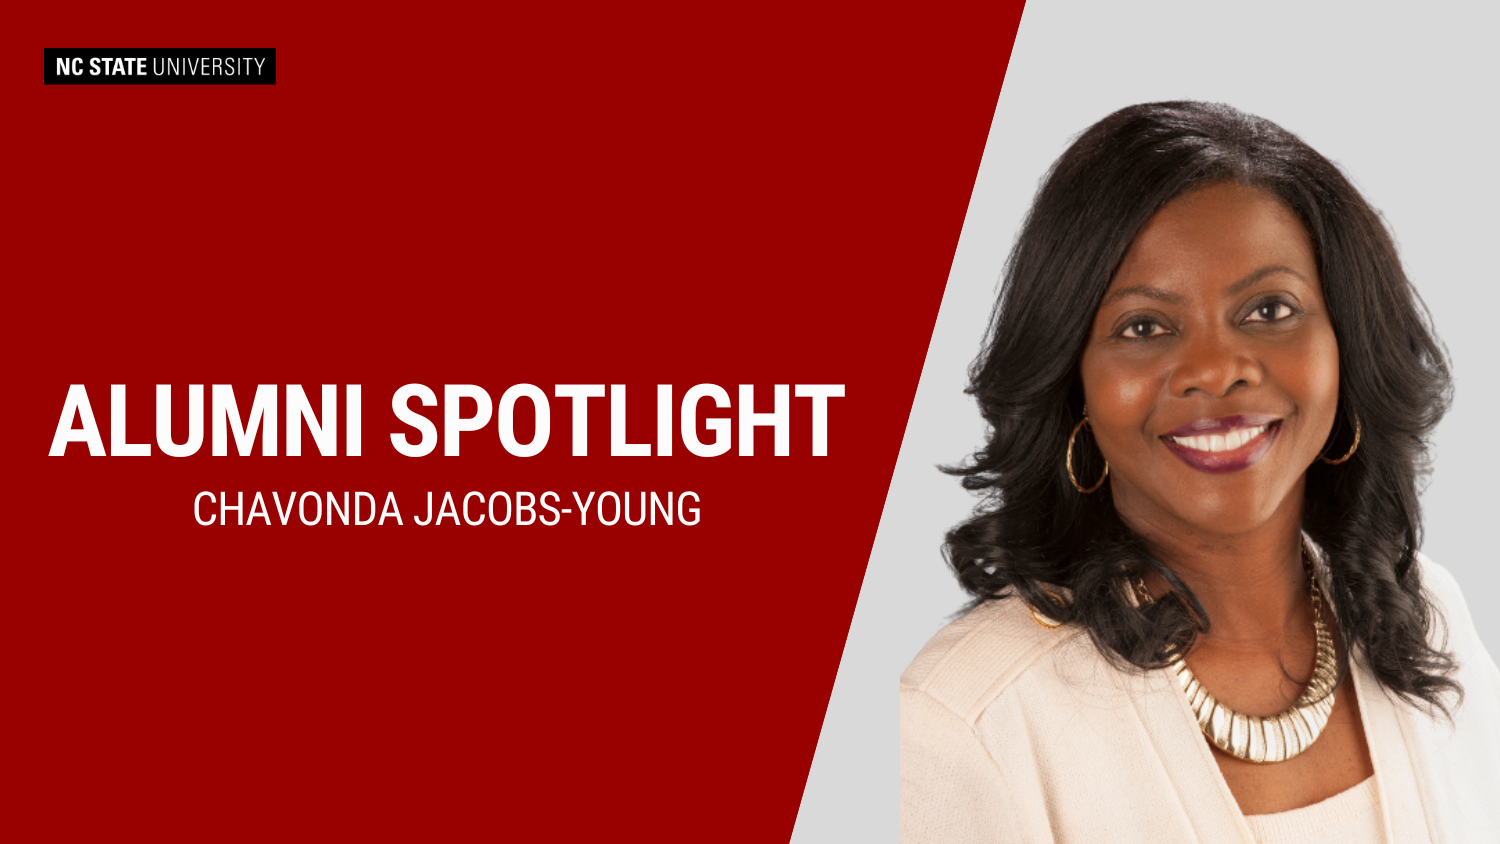 Chavonda Jacobs-Young - Paper Science Alum Chavonda Jacobs-Young Appointed as USDA Under Secretary - College of Natural Resources News NC State University